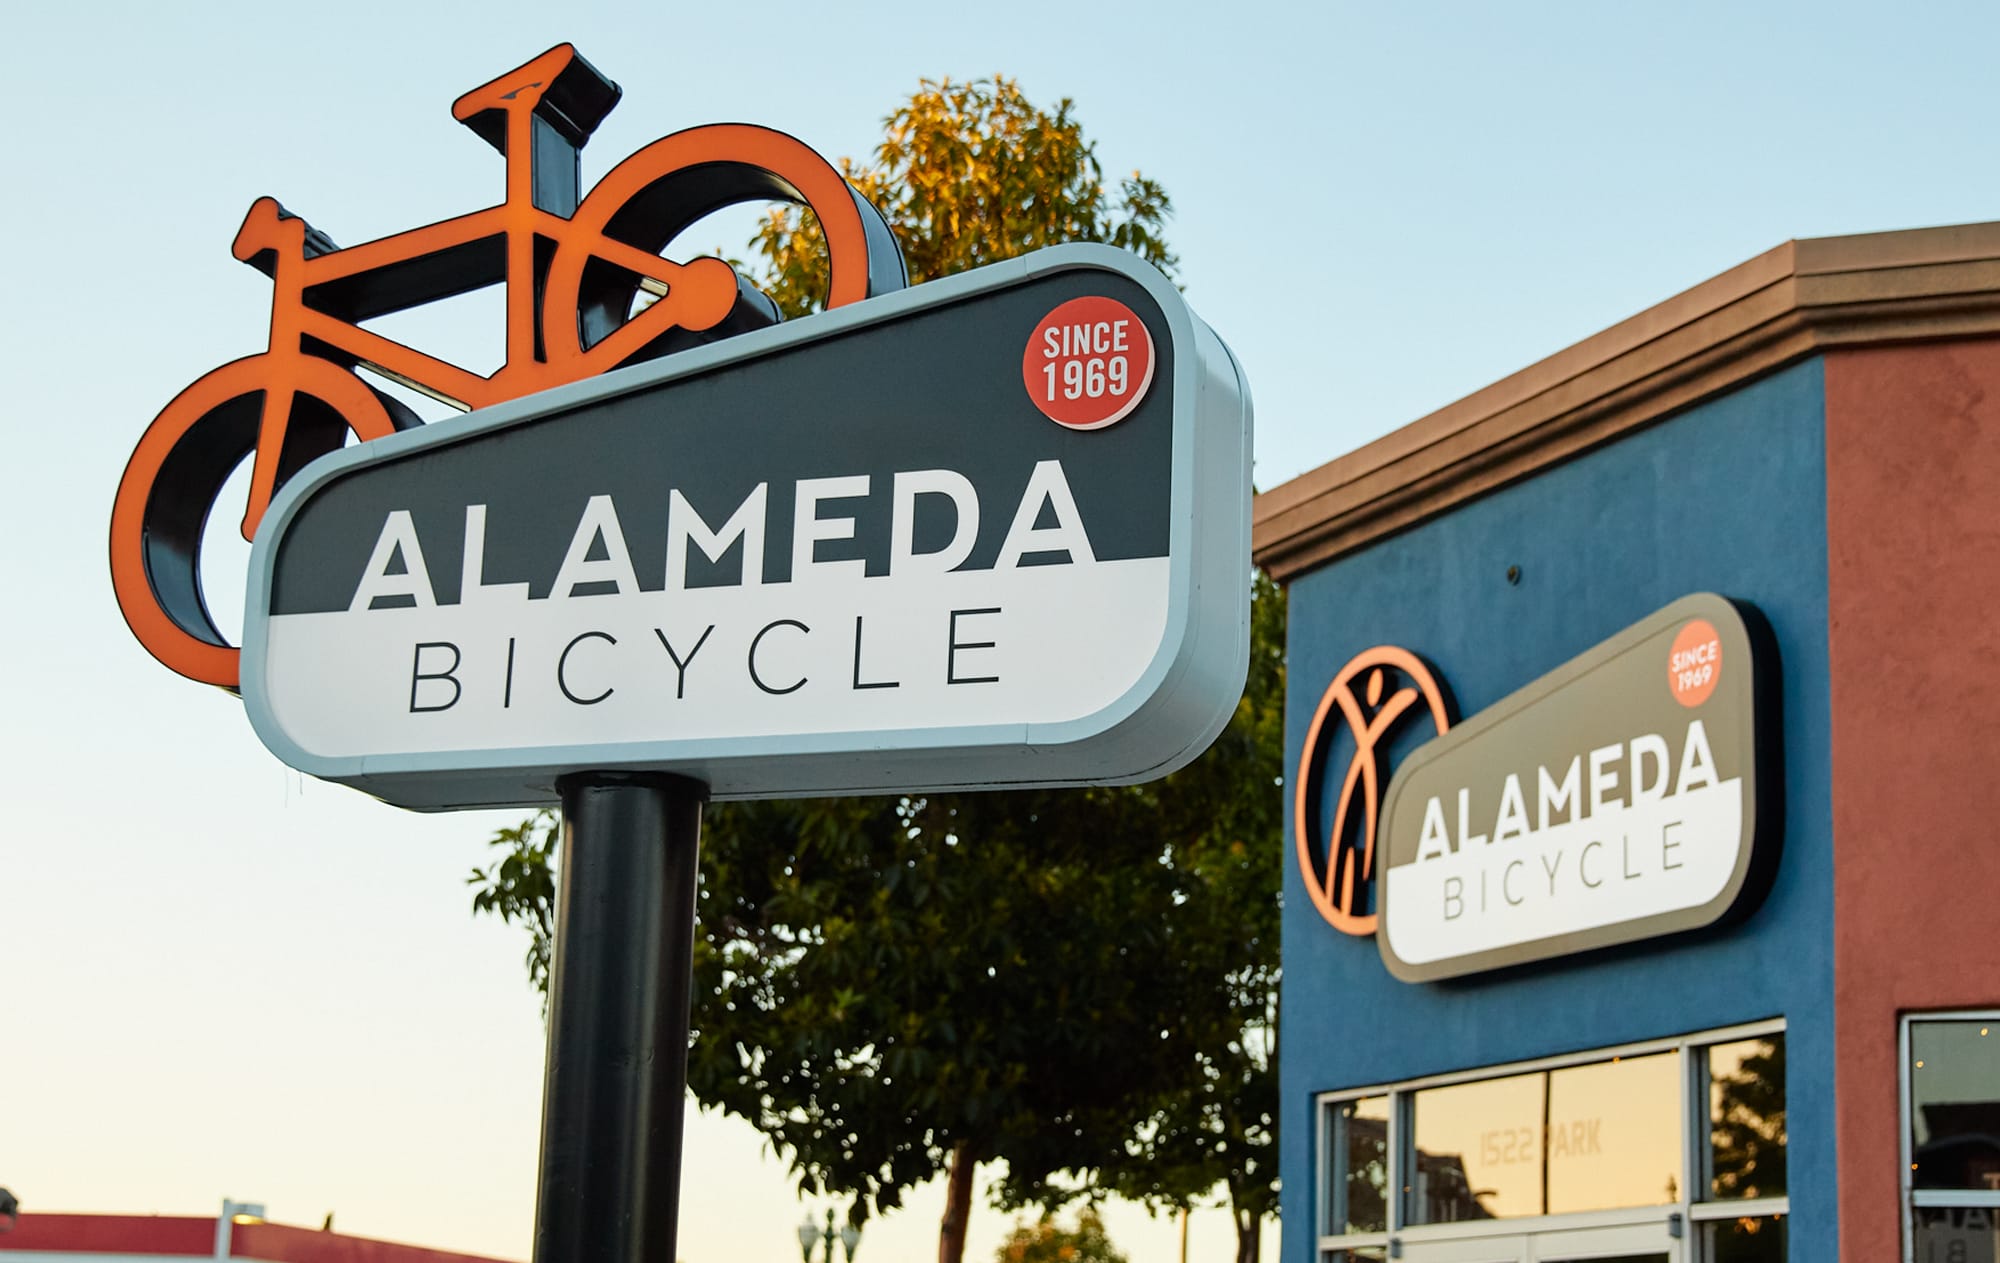 Ad Art Sign Co., AdArt, Full Service Signage, LED Lighting, Digital Signage,Retail, Face-lit double faced bike element on face it, with routed out and push-thru year indicator, pole sign, Alameda, CA,